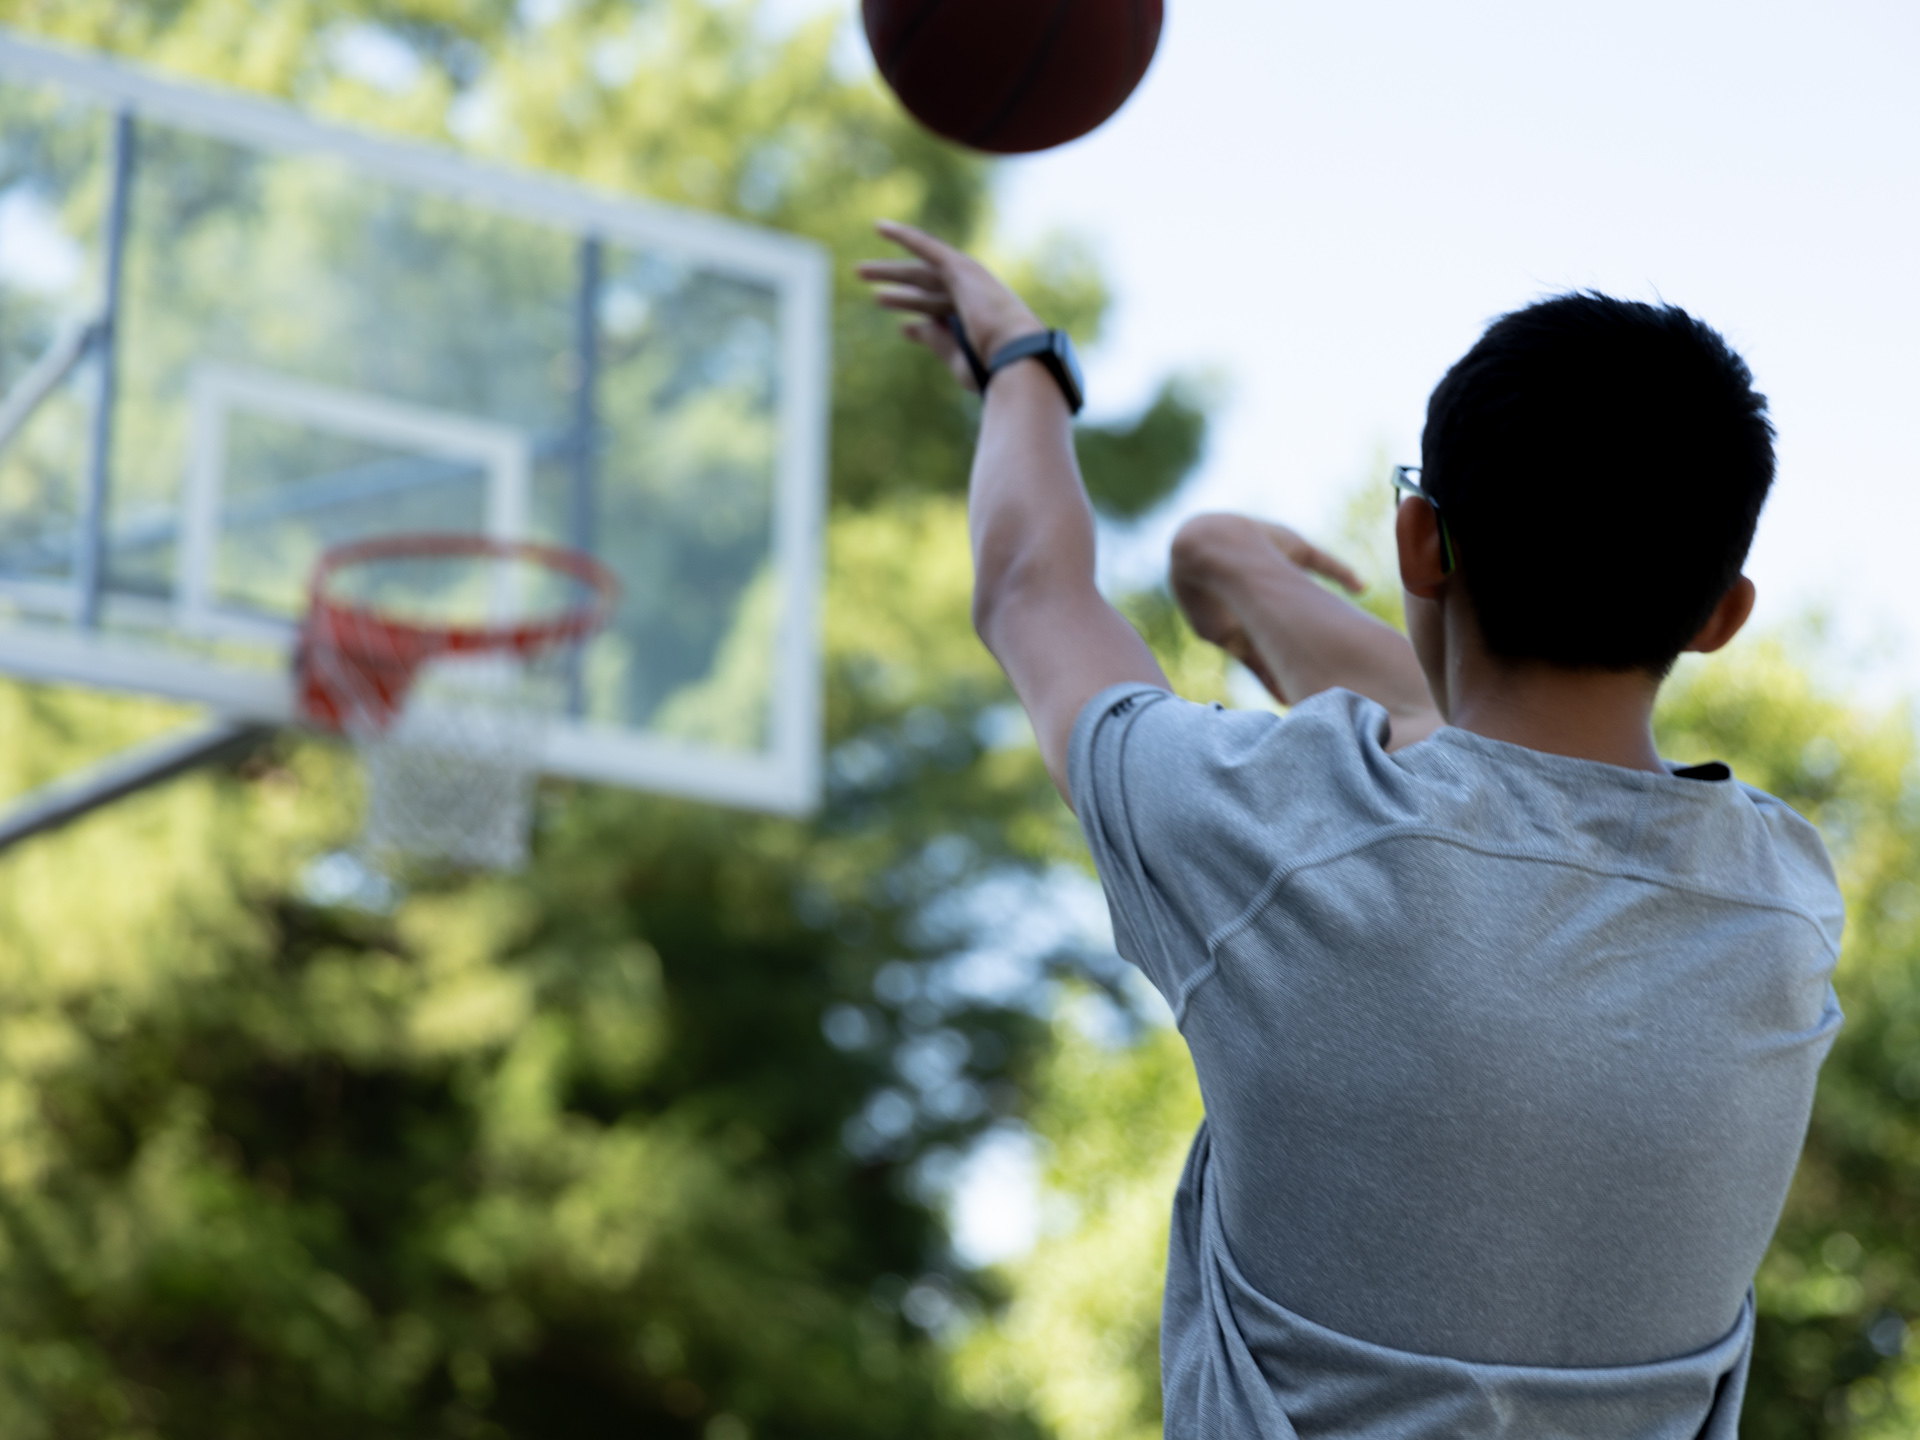 A young man faces a basketball hoop as he attempts to put the ball in the net. His arms are outstretched as the ball flys through the air.